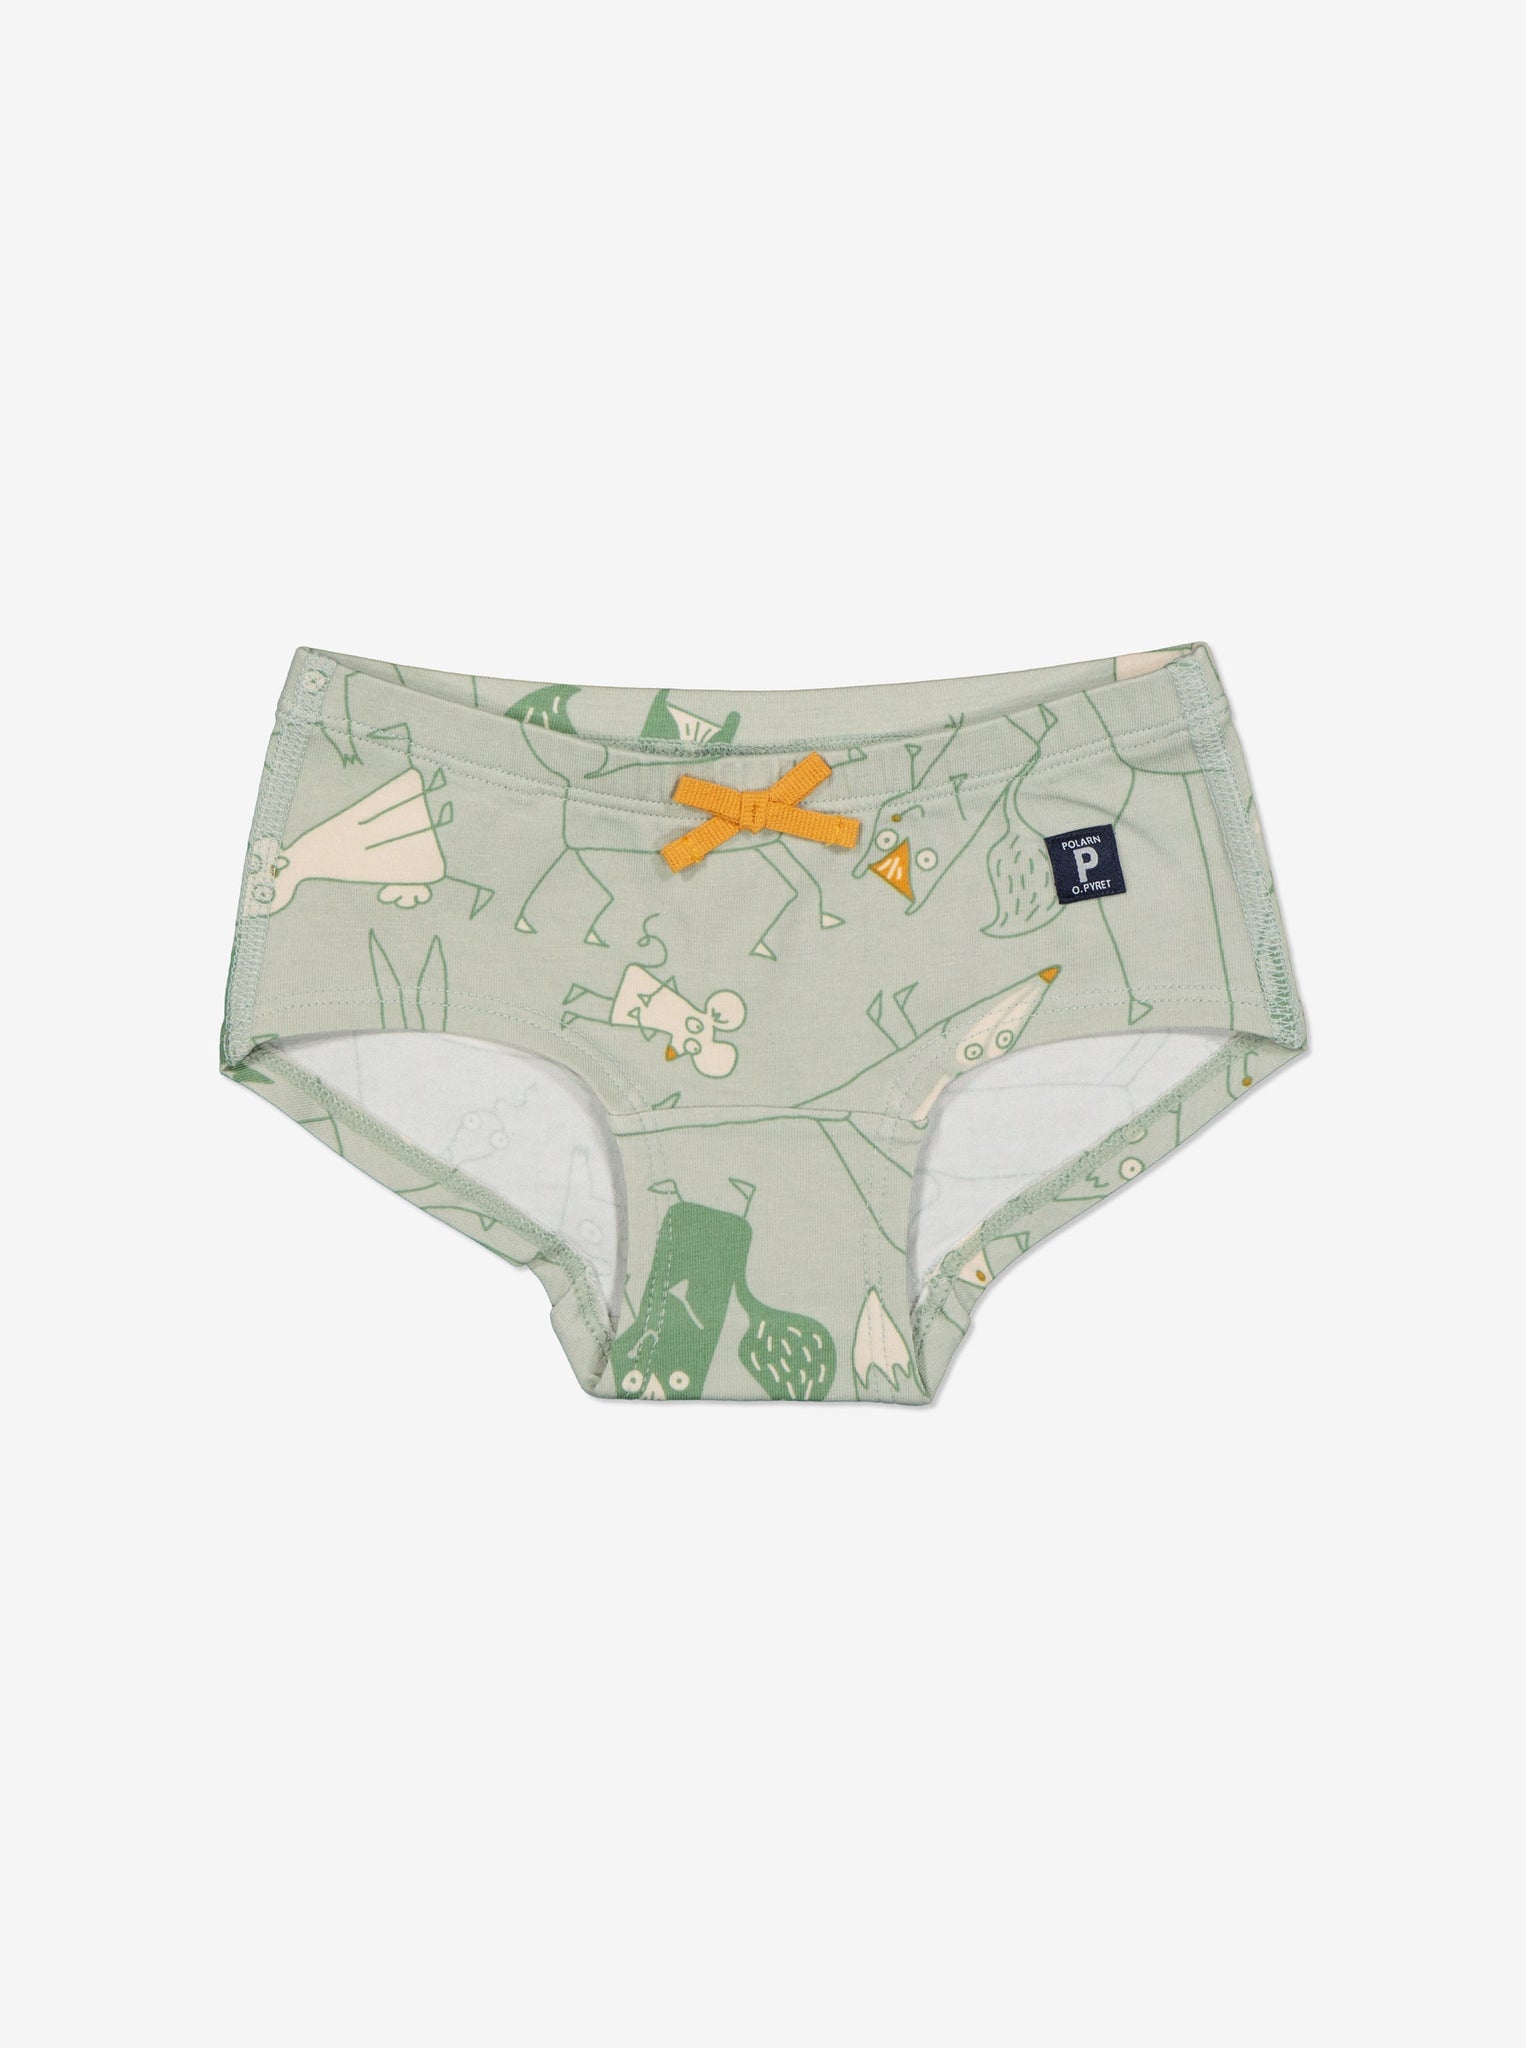 Green Girls Hipster Briefs from the Polarn O. Pyret Kidswear collection. Ethically produced kids clothing.